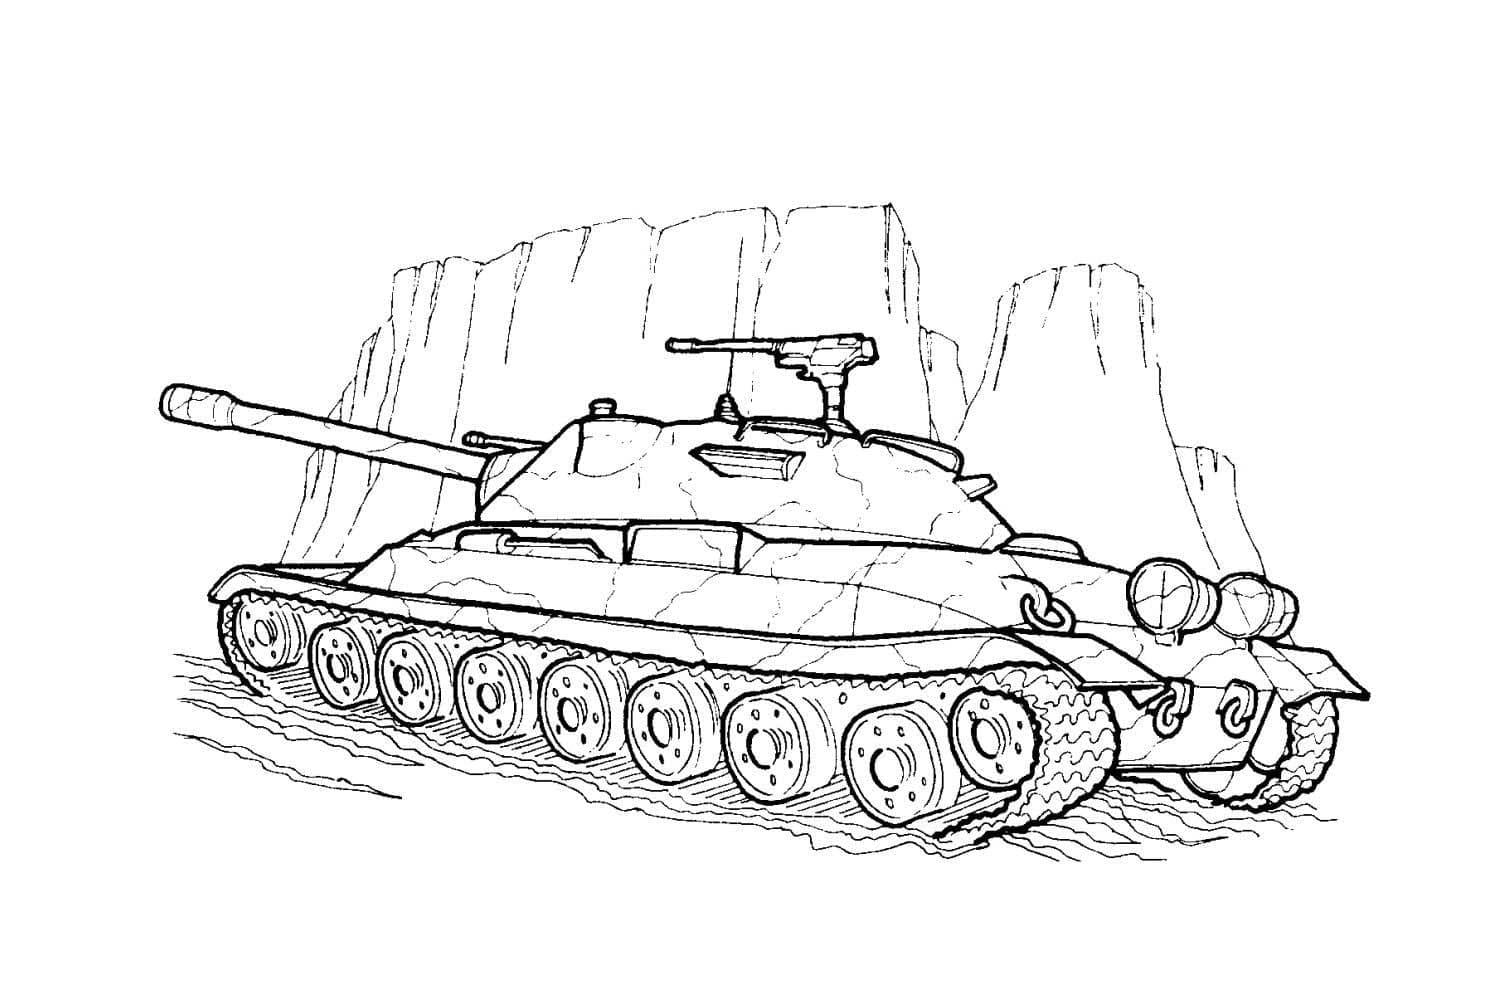 Panzer IS-7